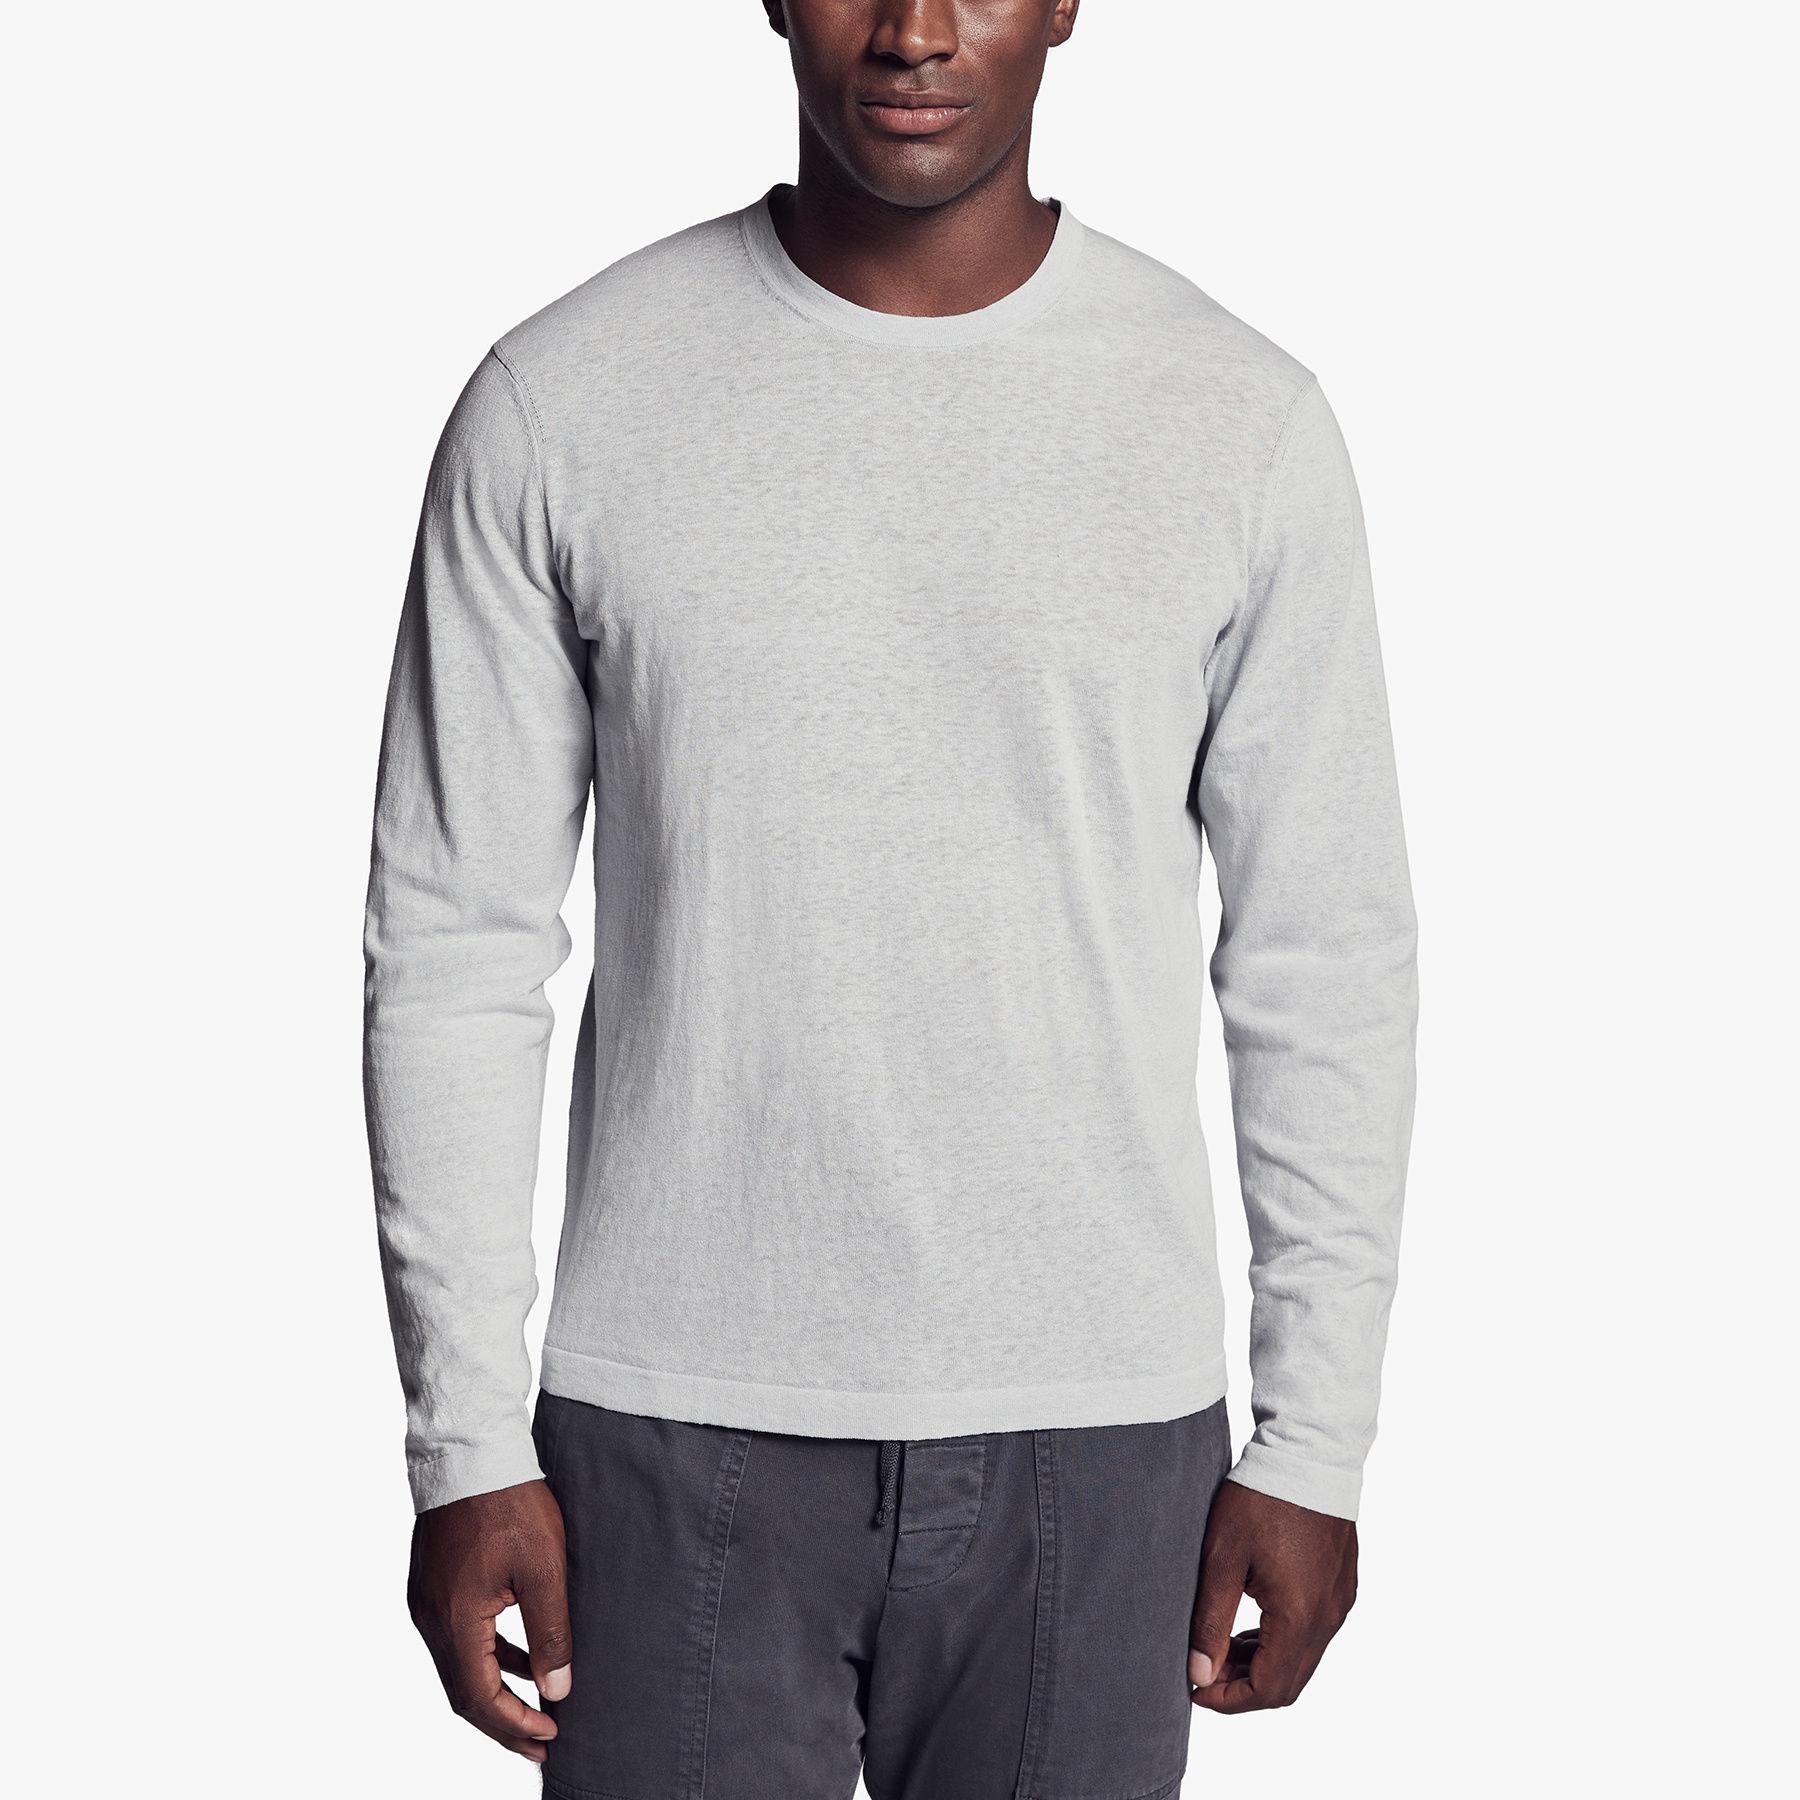 James Perse Recycled Cotton Crew Neck Sweater in Gray for Men - Lyst